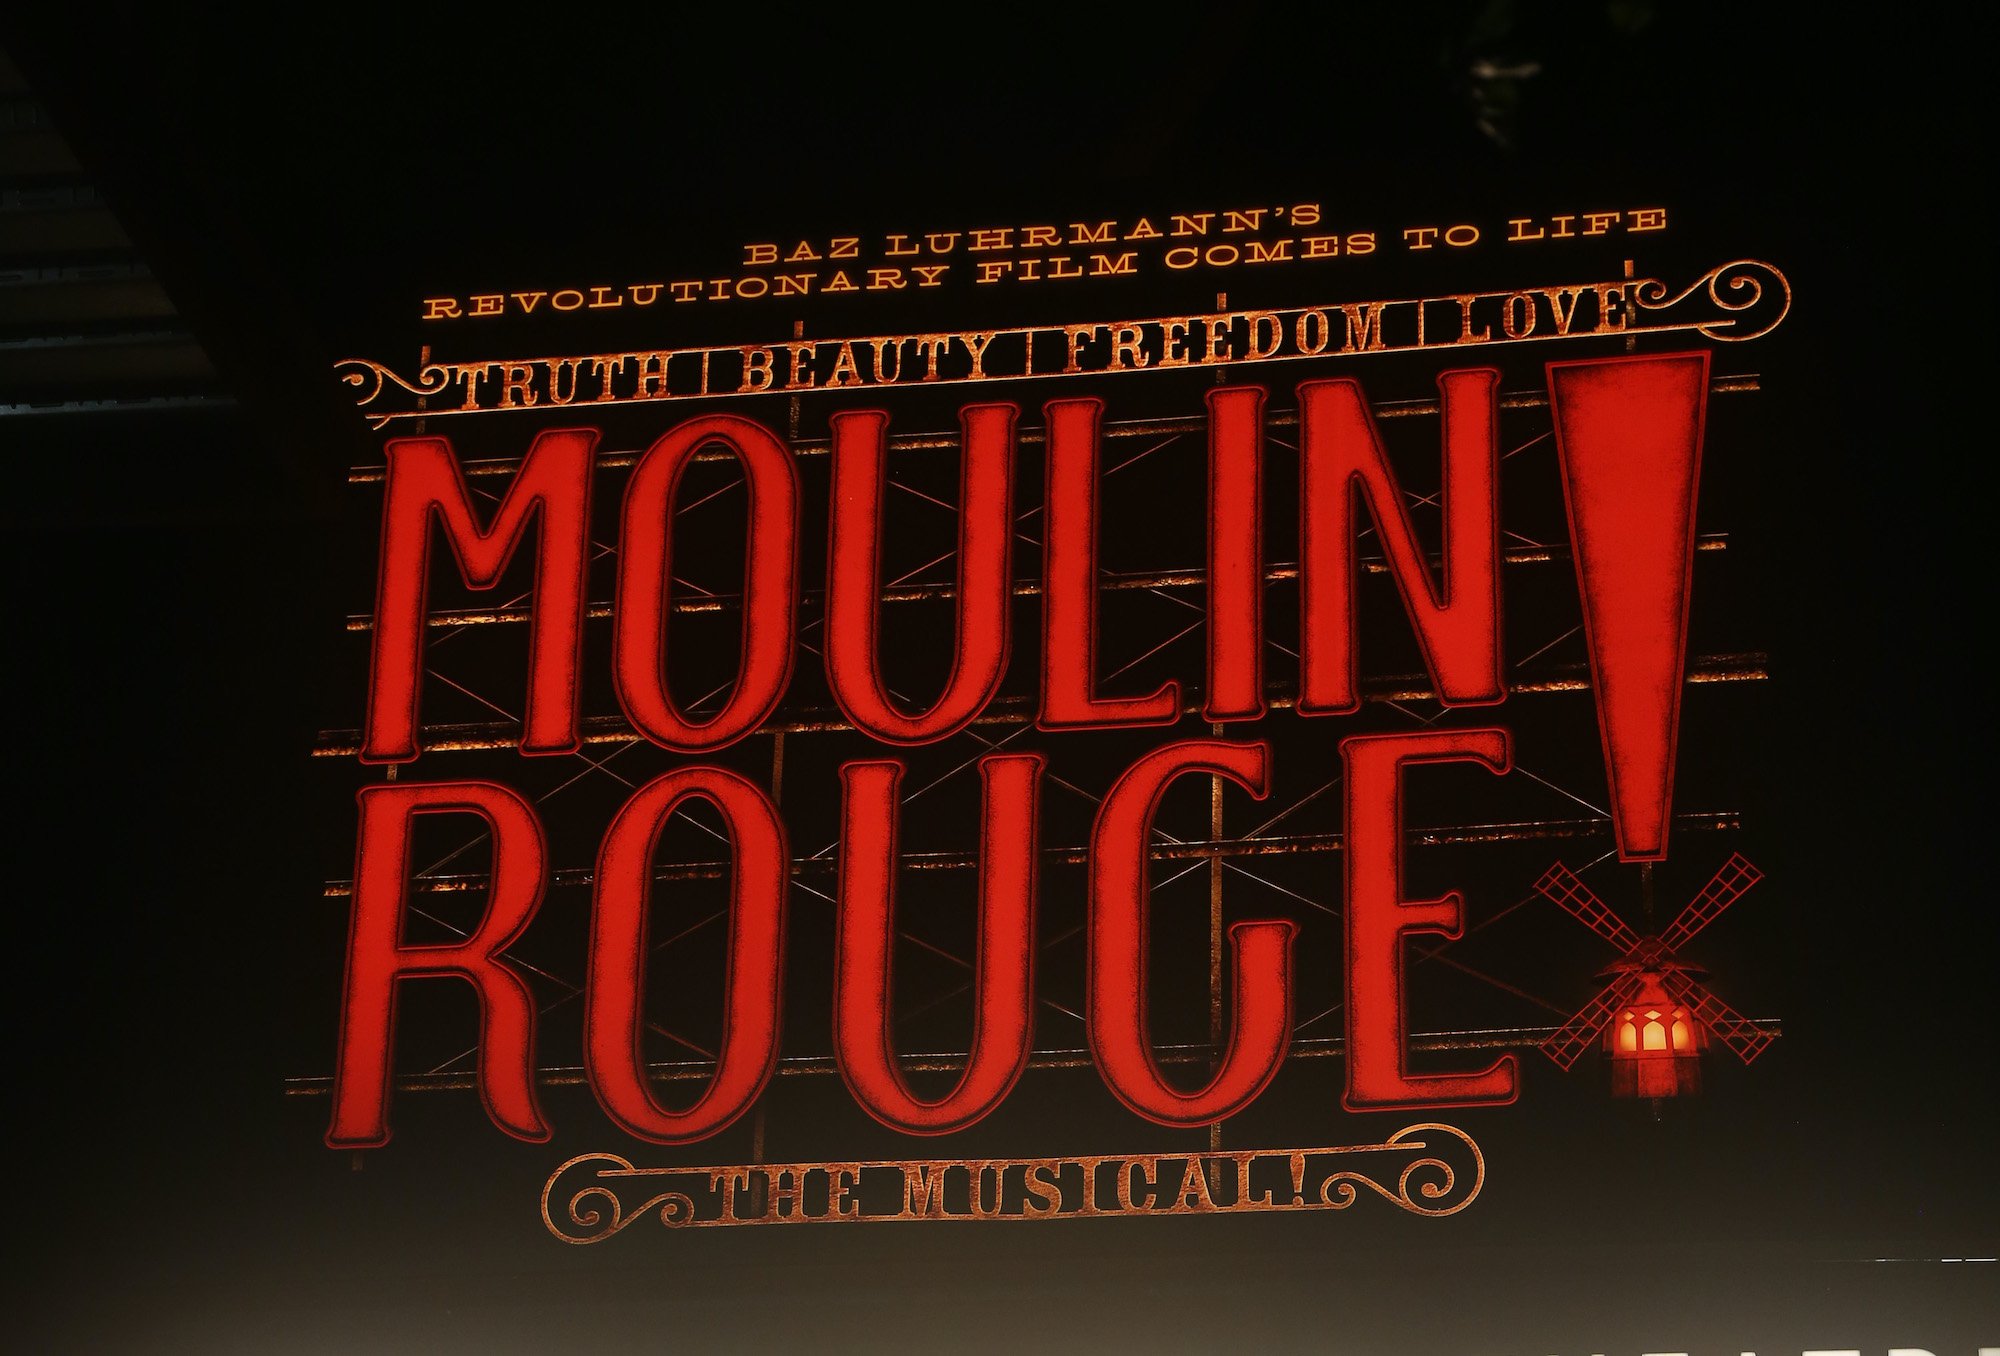 Signage at the re-opening night of 'Moulin Rouge! The Musical' on Broadway on Sept. 24, 2021 in New York City. The sign is large with red lettering that says 'MOULIN ROUGE! The Musical!' 'Truth, Beauty, Freedom, Love,' and 'Baz Luhrmann's revolutionary film comes to life.' 'Moulin Rouge! The Musical' is based on Baz Luhrmann's 2001 'Moulin Rouge!' movie starring Nicole Kidman and Ewan McGregor. And the 'Moulin Rouge!' Tony Awards prove the story is still beloved 20 years later.